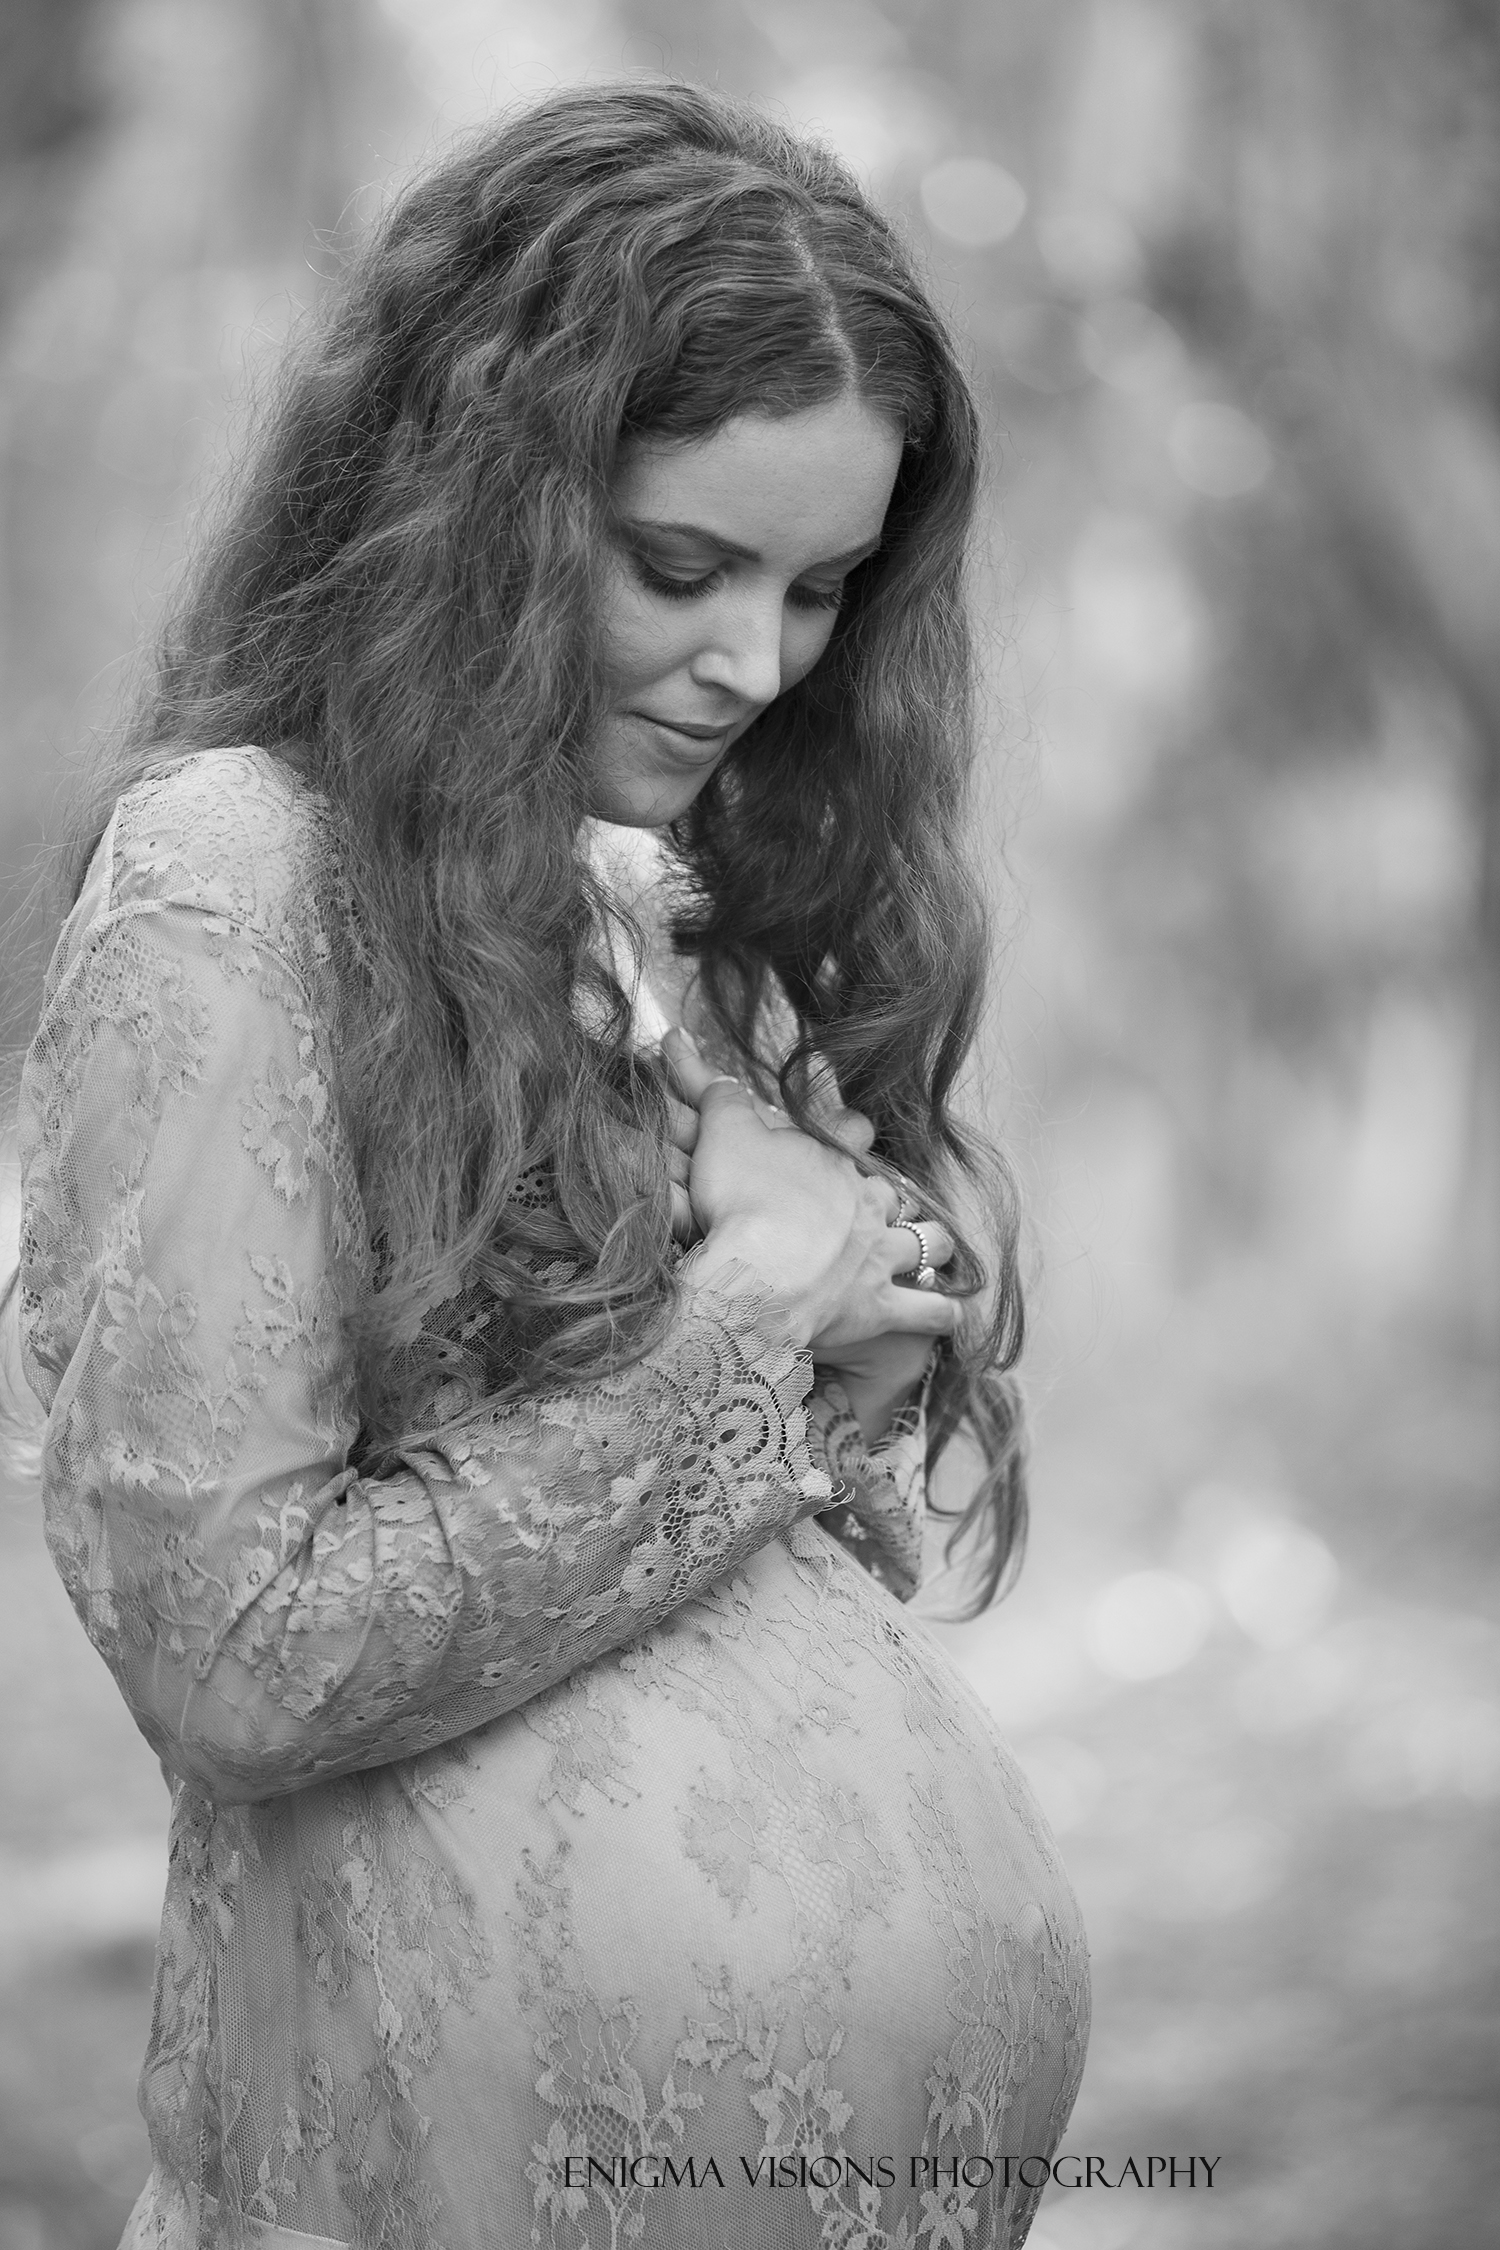 Enigma_Visions_Photography_Maternity_Mahlea013.jpg